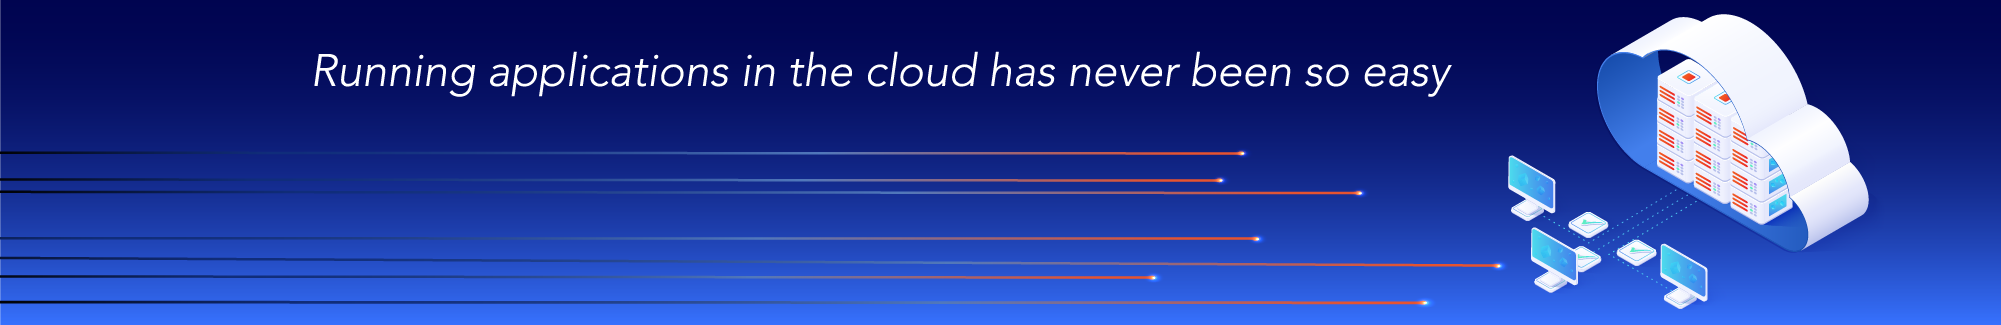 navy banner showing applications going to cloud graphic 